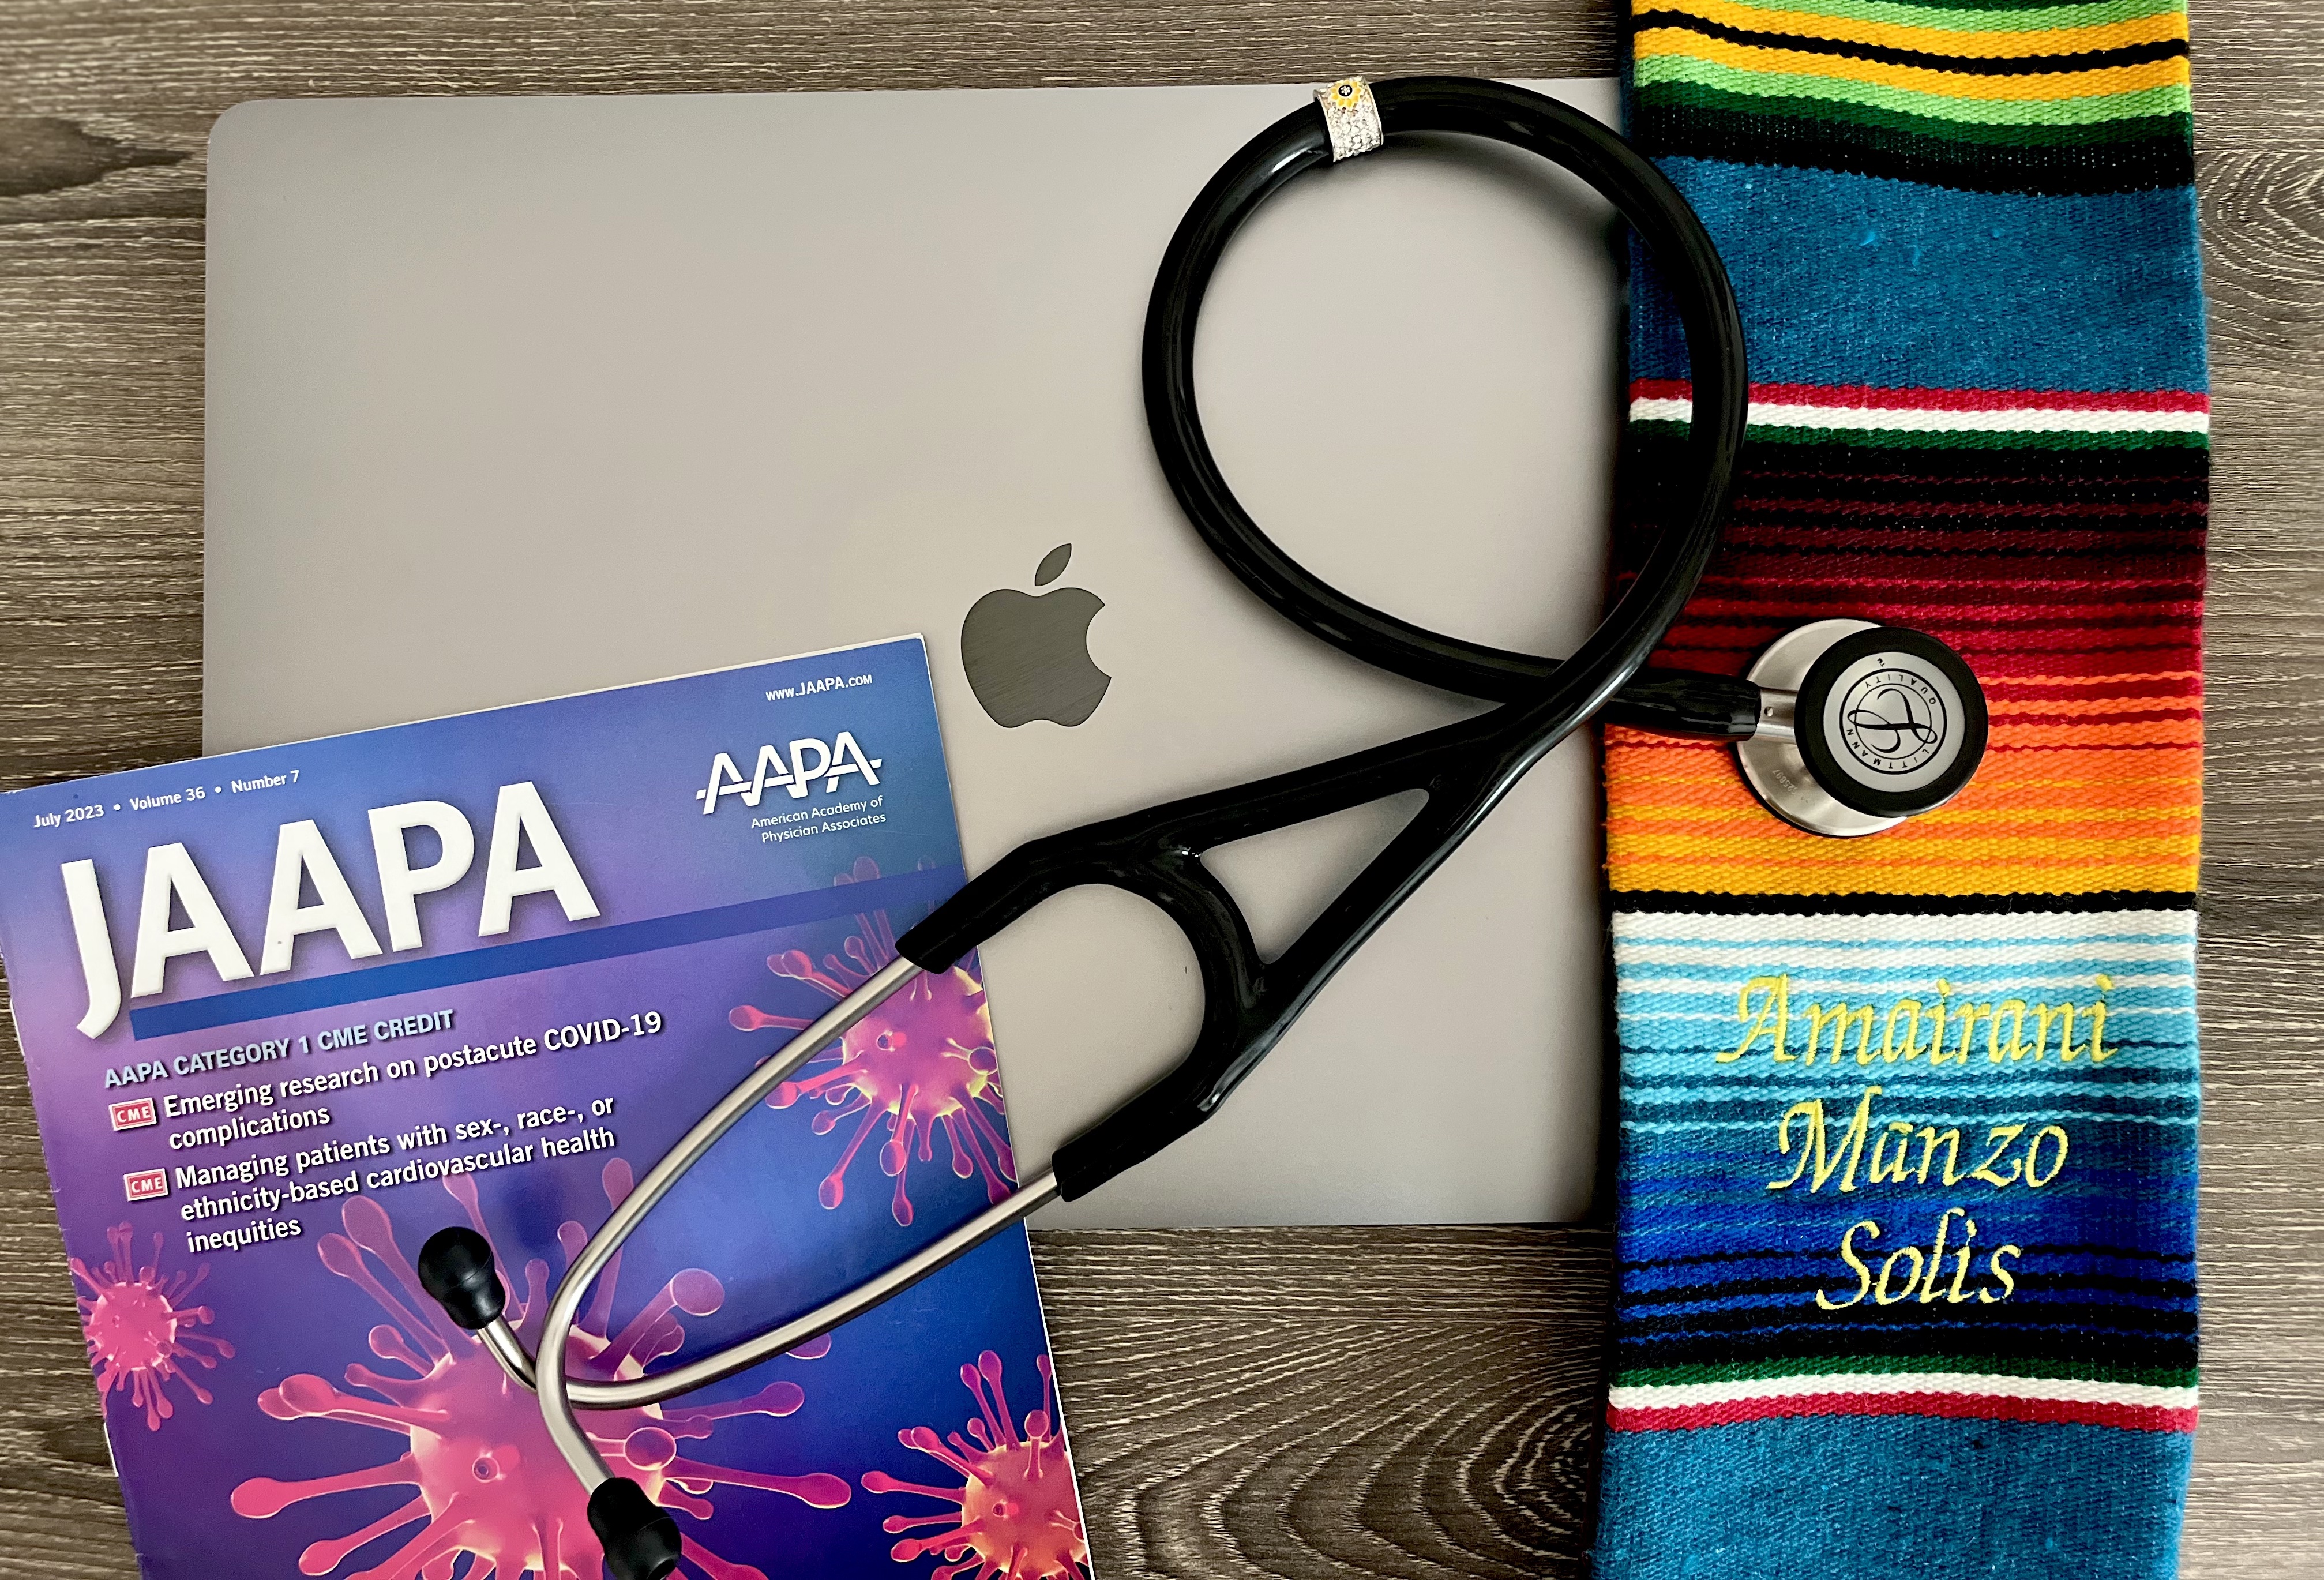 Image of a closed laptop with a stethoscope, JAAPA journal and graduation cords on top